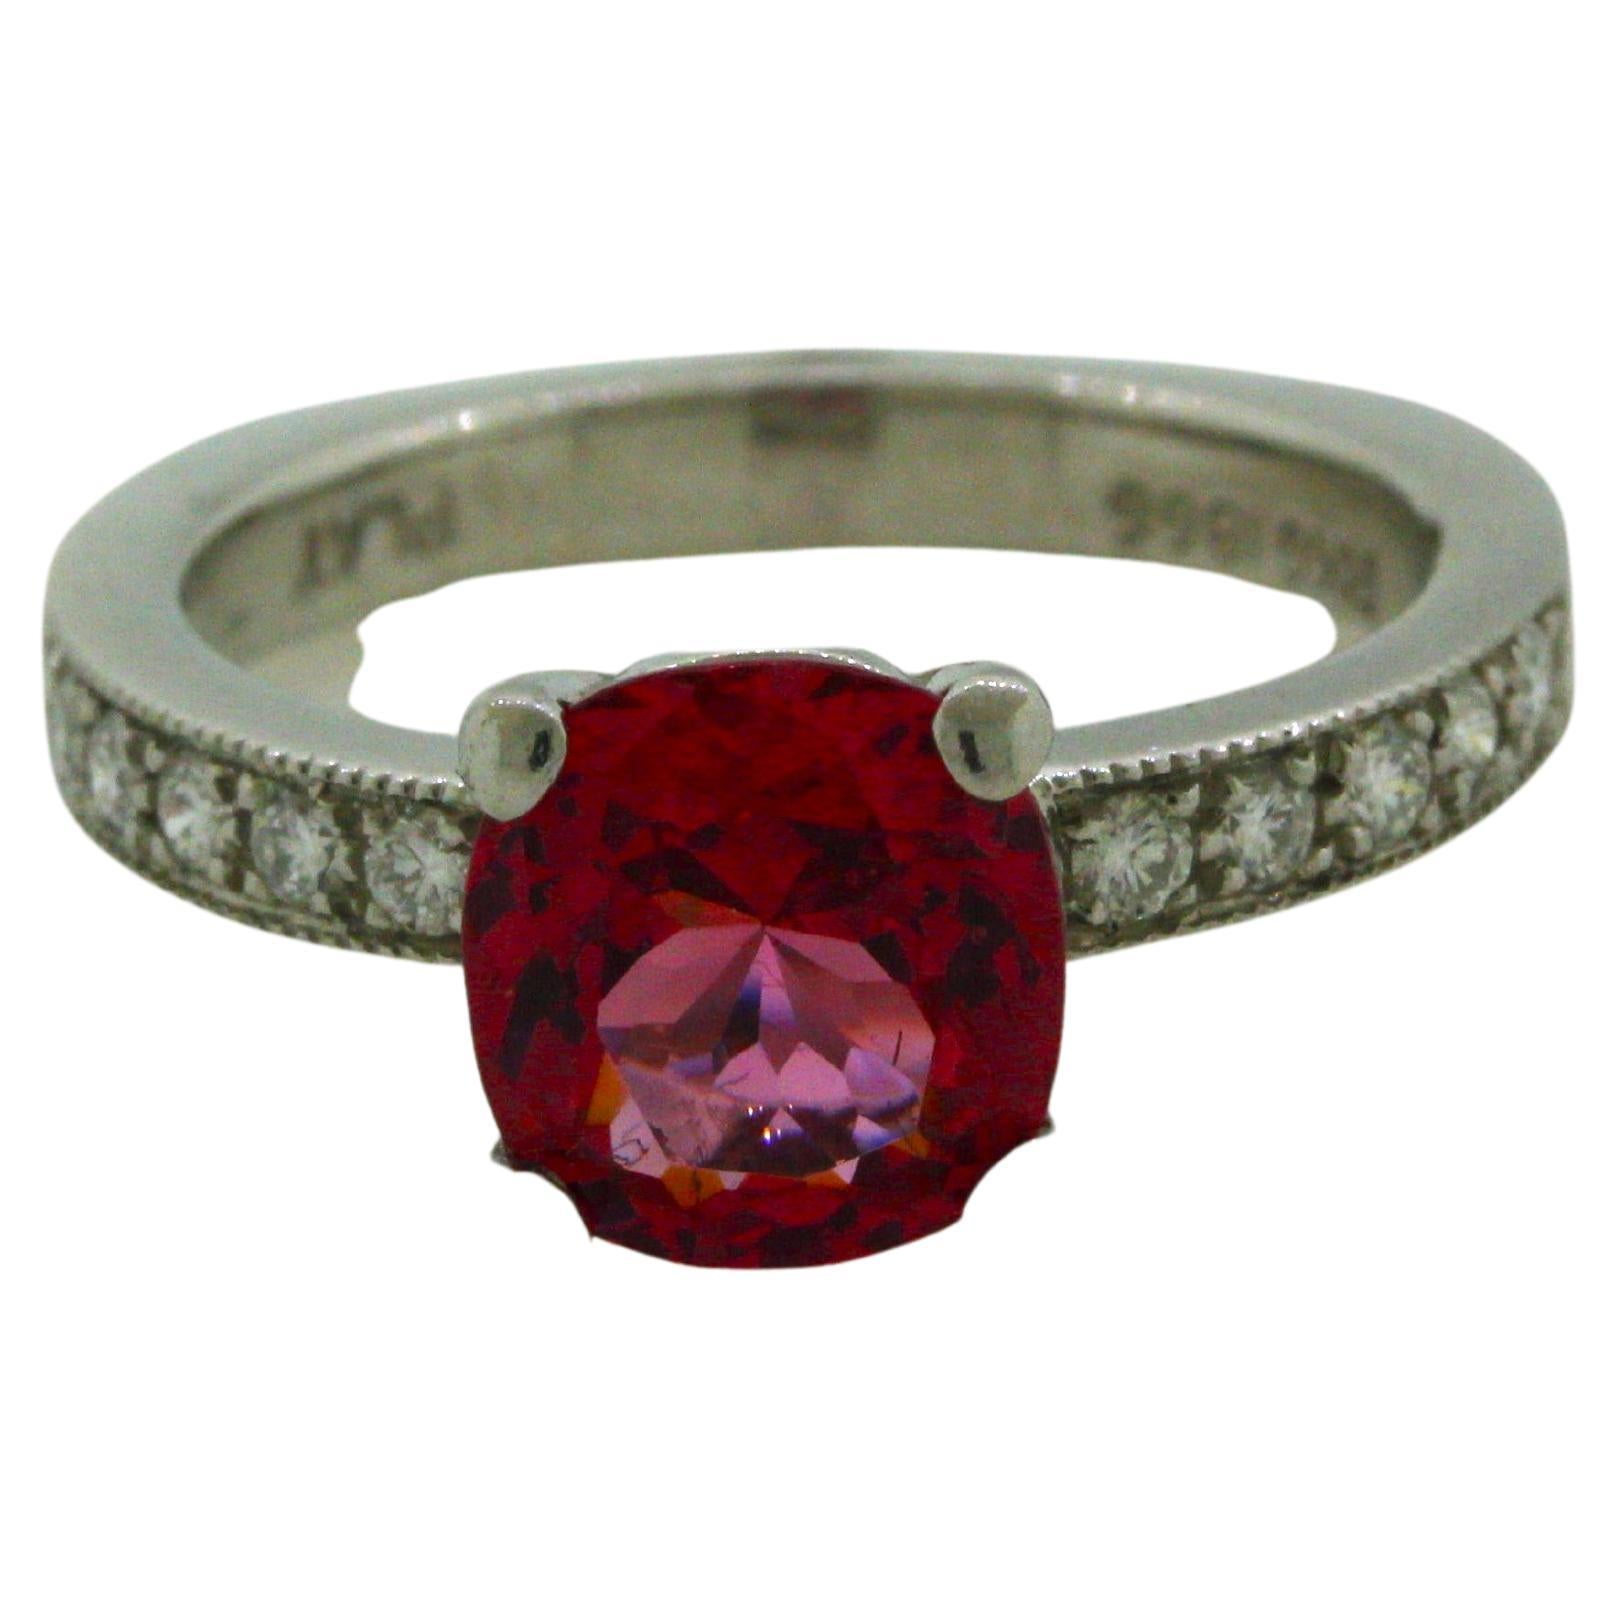 2.11 Carat Fine Pink Spinel Diamond Platinum Ring, GIA Certified For Sale